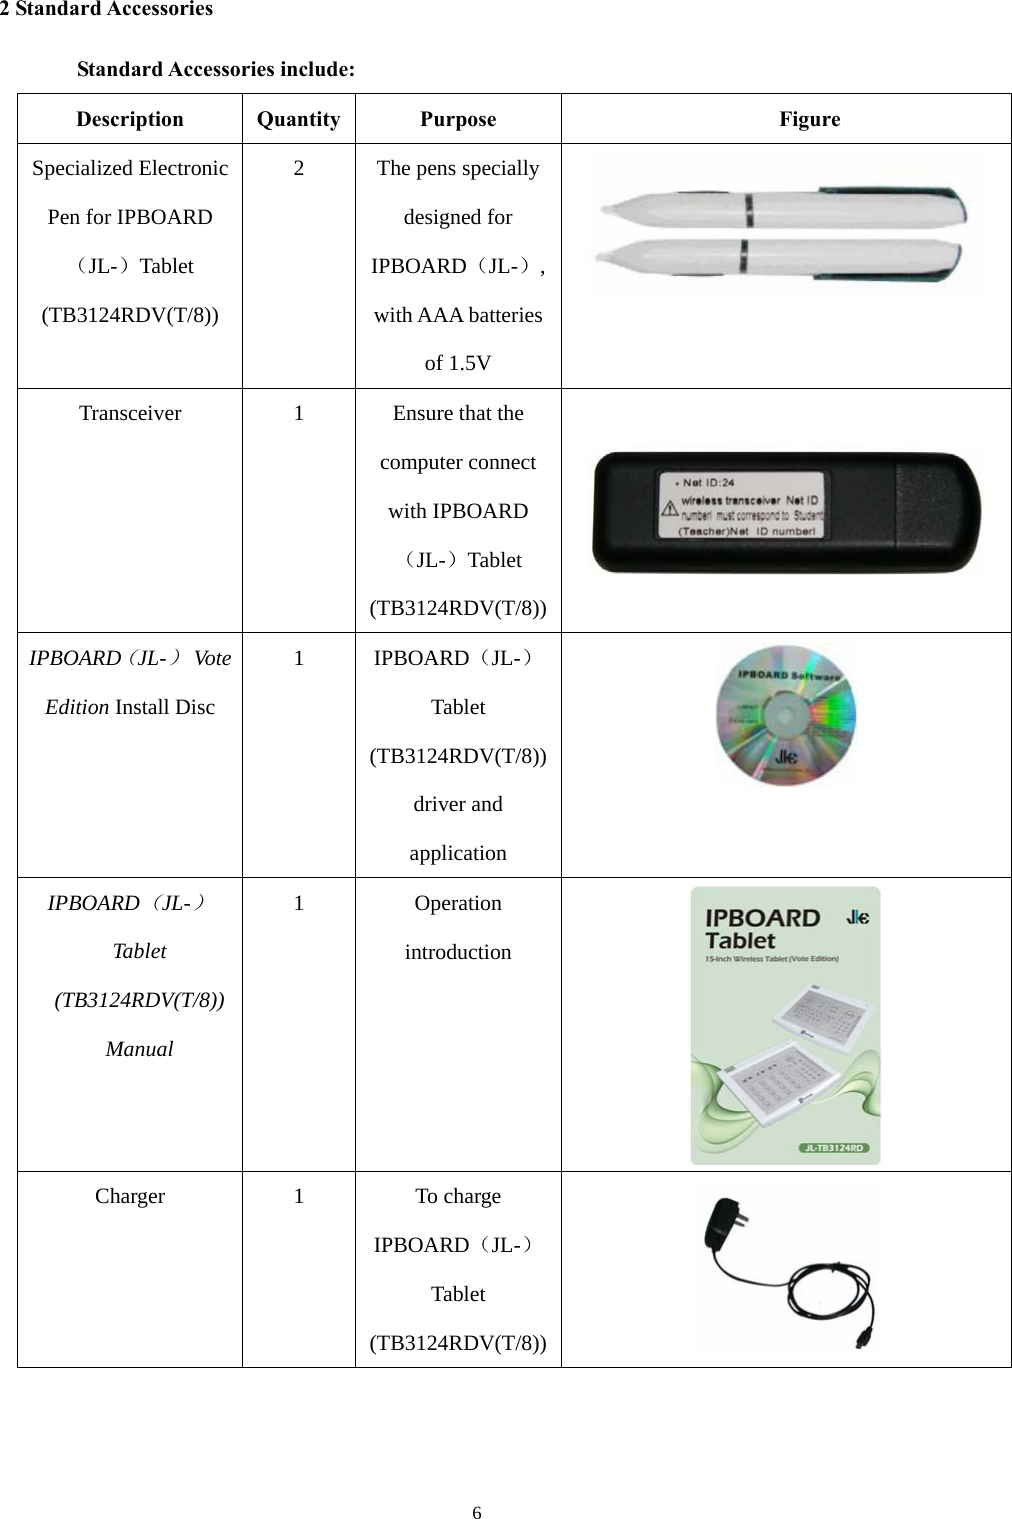  6 2 Standard Accessories Standard Accessories include:   Description Quantity Purpose Figure Specialized Electronic Pen for IPBOARD（JL-）Tablet (TB3124RDV(T/8)) 2 The pens specially designed for IPBOARD（JL-）, with AAA batteries of 1.5V  Transceiver  1  Ensure that the computer connect with IPBOARD（JL-）Tablet (TB3124RDV(T/8)) IPBOARD（JL-） Vote Edition Install Disc 1 IPBOARD（JL-） Tablet (TB3124RDV(T/8)) driver and application  IPBOARD（JL-） Tablet (TB3124RDV(T/8)) Manual 1 Operation introduction  Charger 1 To charge IPBOARD（JL-） Tablet (TB3124RDV(T/8))   